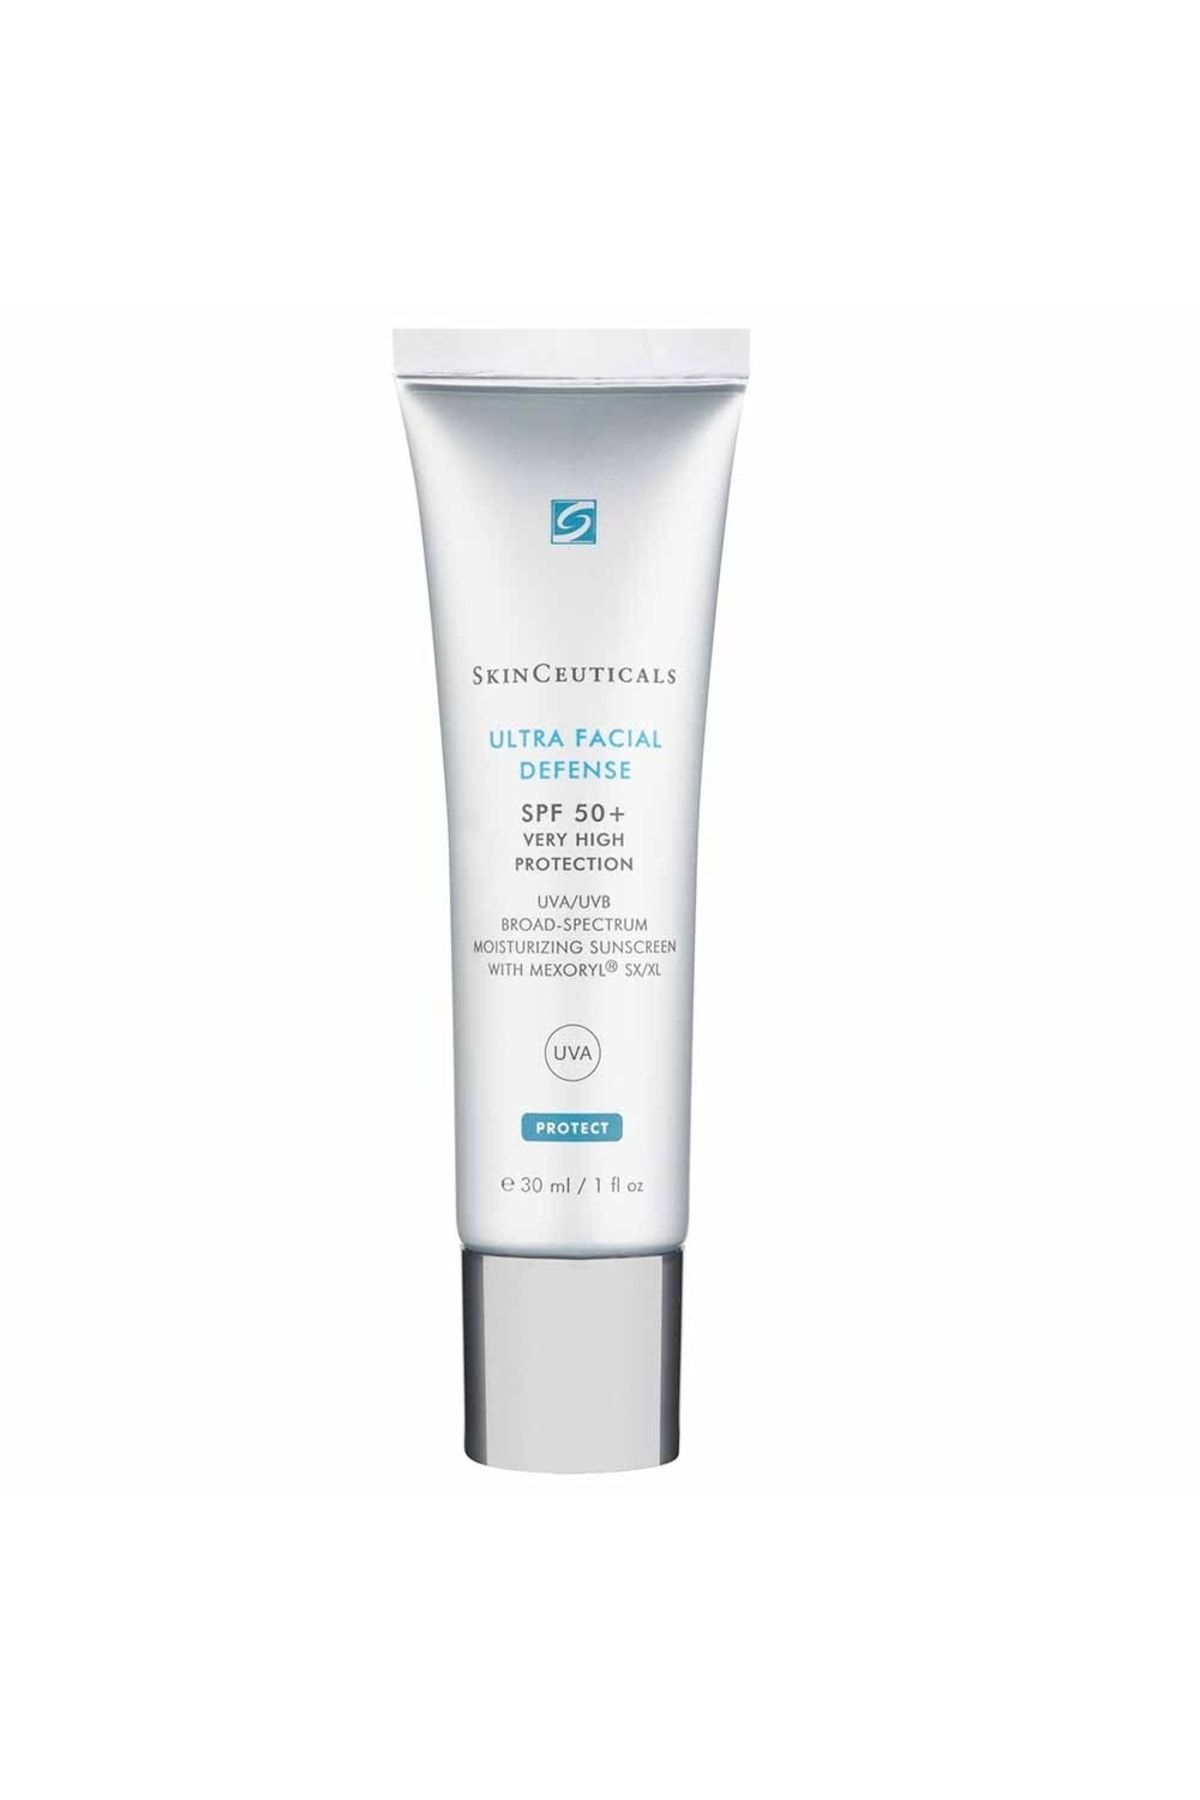 Skinceuticals Ultra Facial Spf50+ Defence 30ml